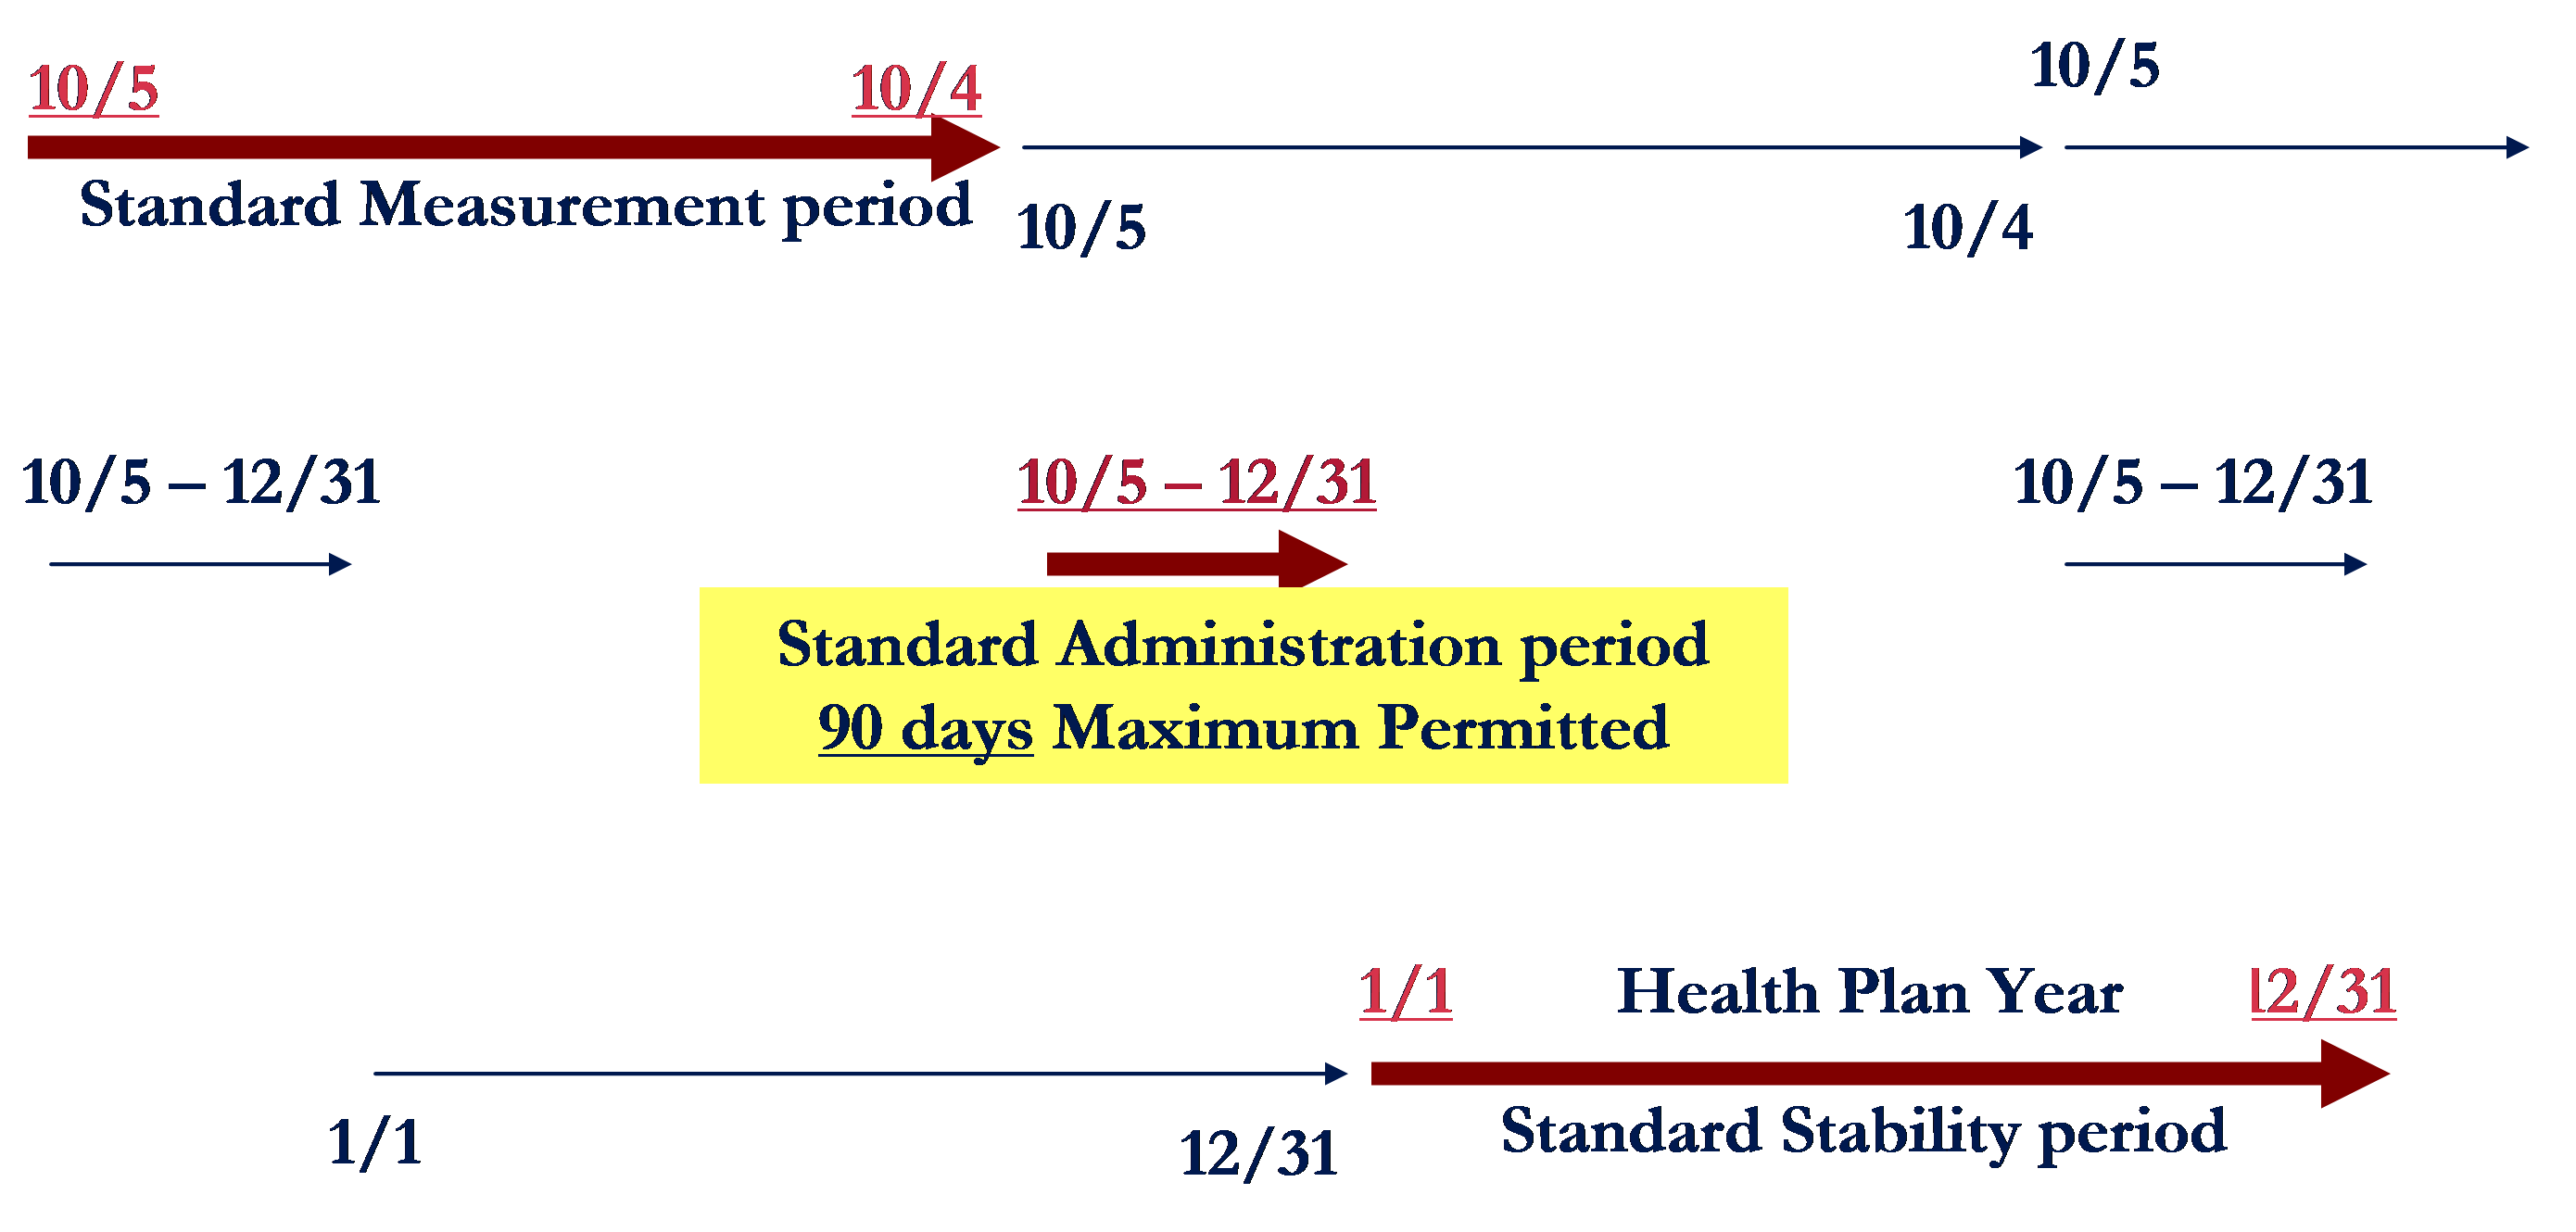 Illustration of a Standard Measurement Period, Administrative Period and Standard Stability Period for Ongoing Employees